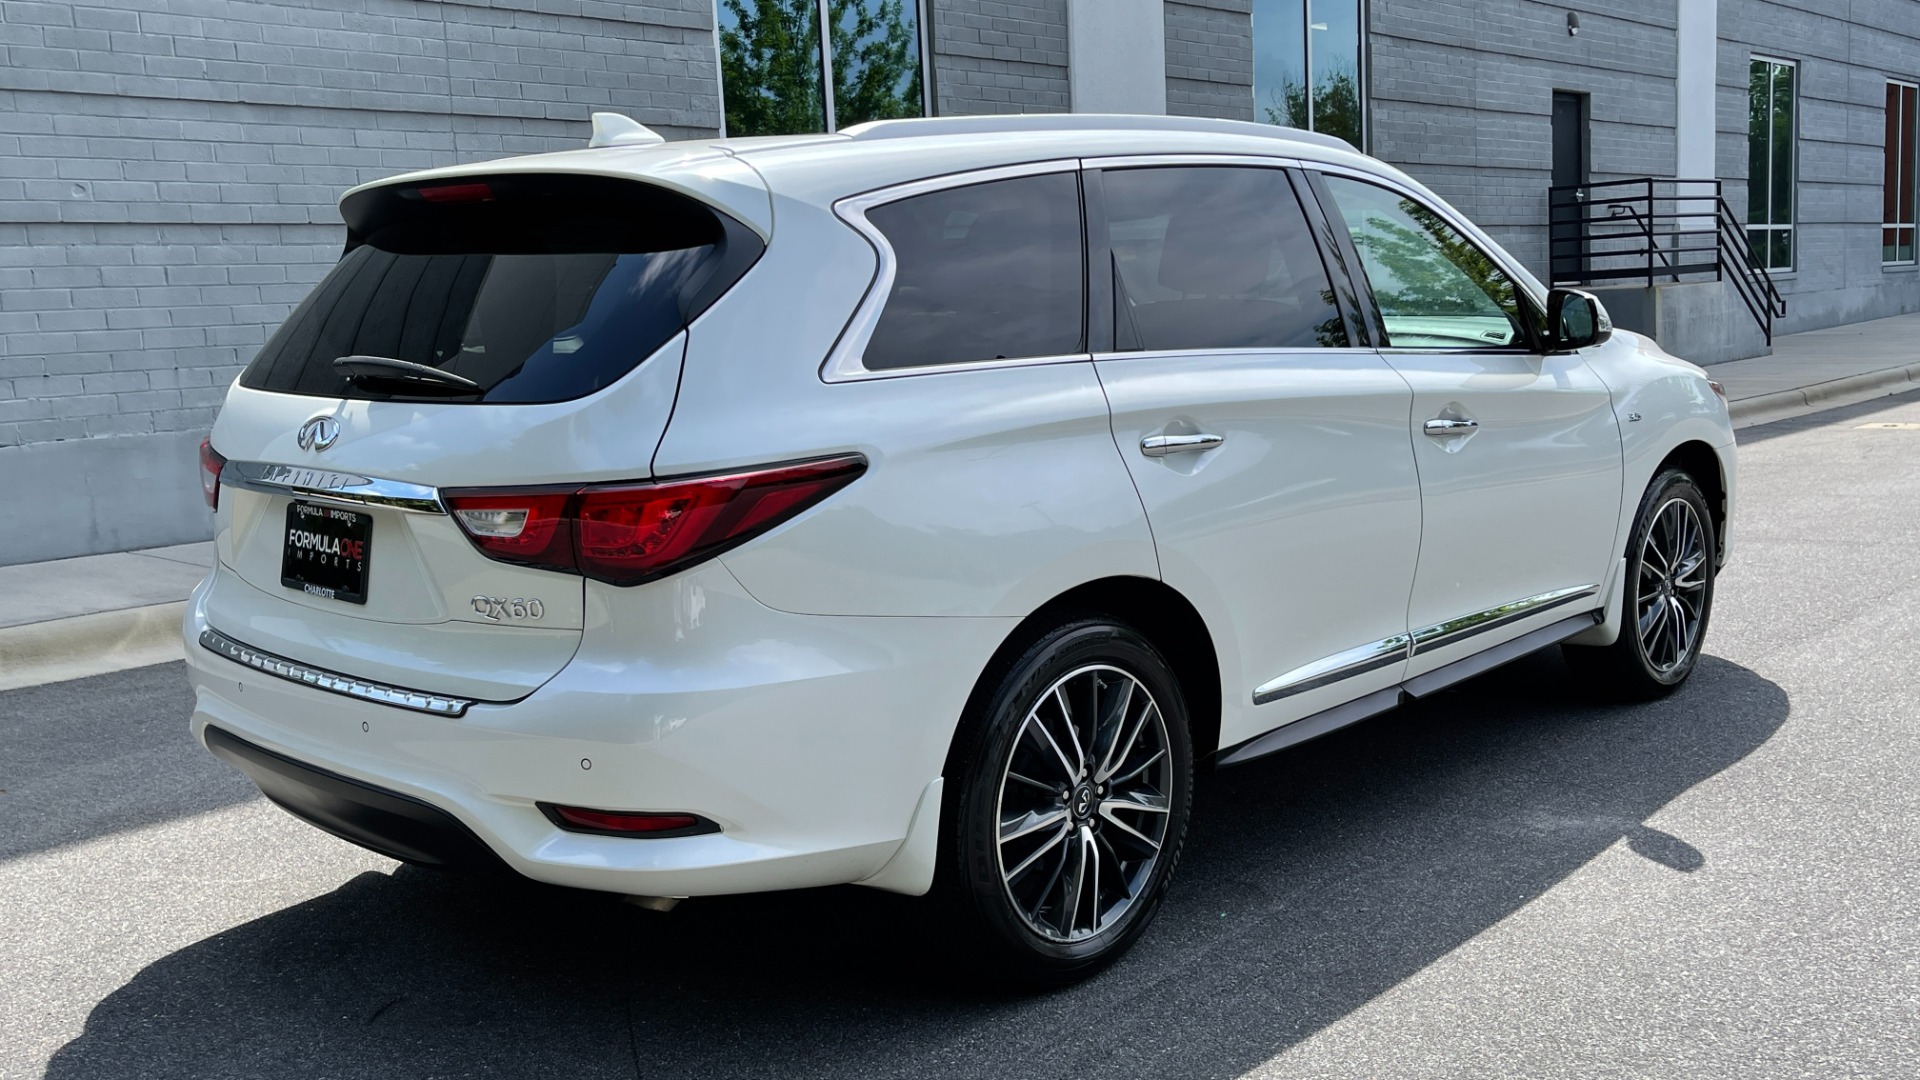 Used 2016 INFINITI QX60 AWD / DVD / 3RD ROW SEATS / DELUXE TECH for sale $27,999 at Formula Imports in Charlotte NC 28227 9